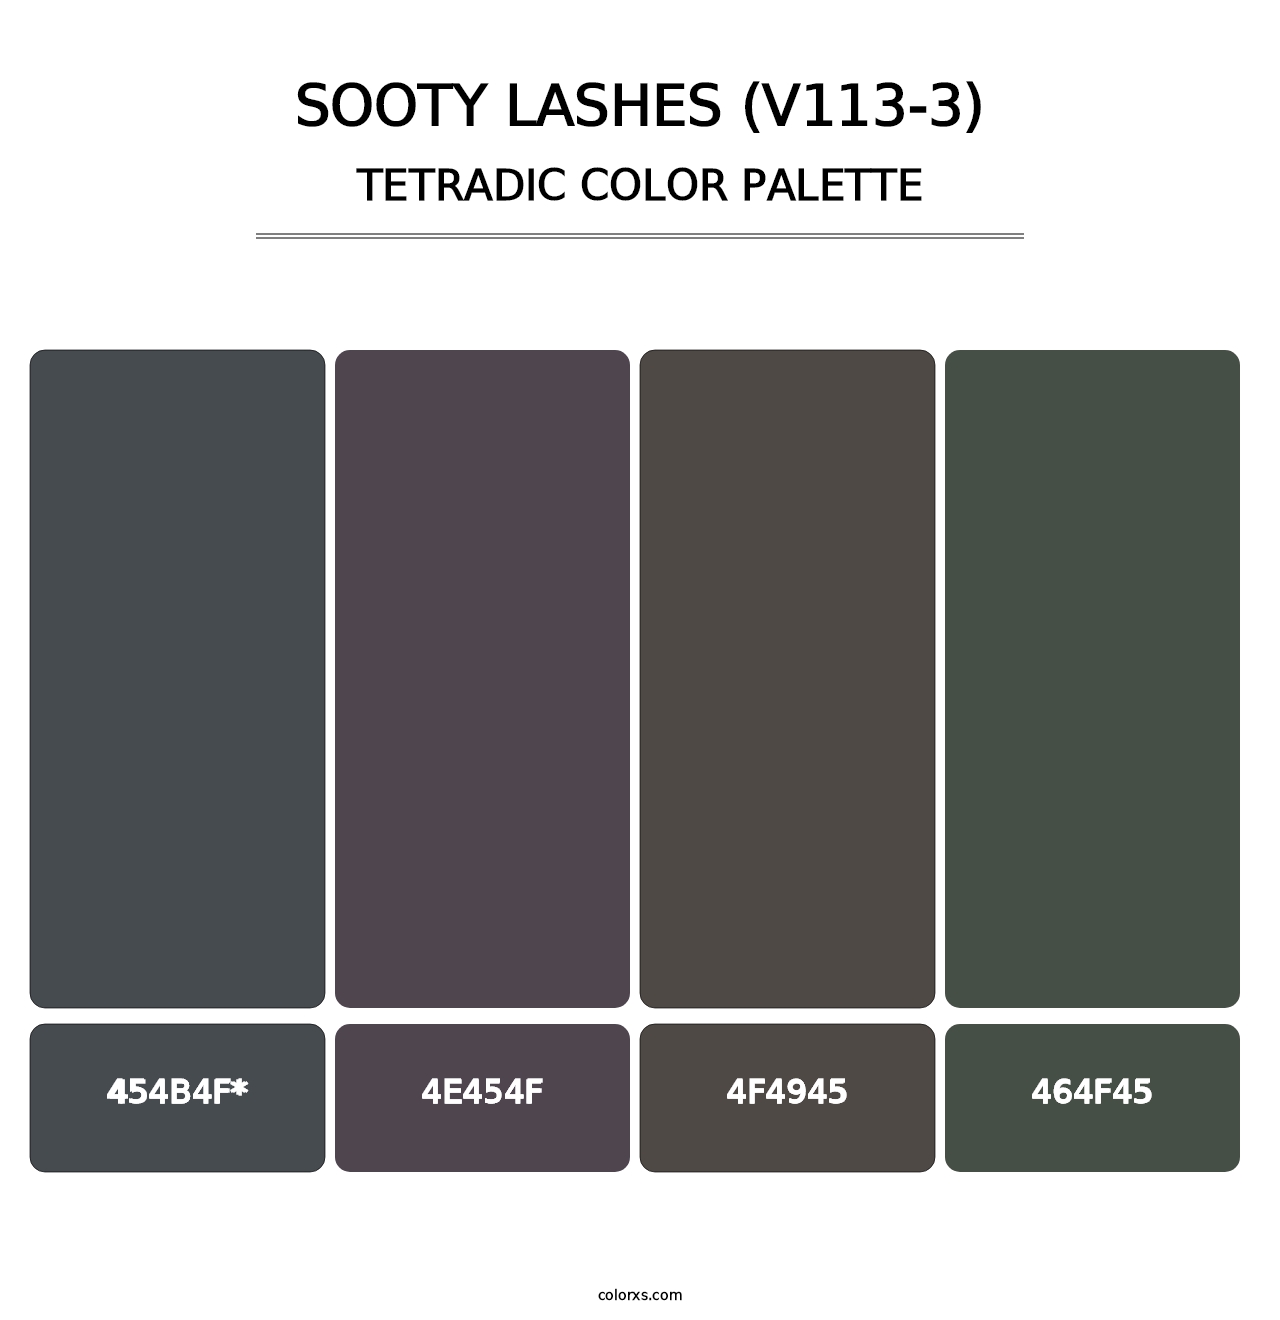 Sooty Lashes (V113-3) - Tetradic Color Palette